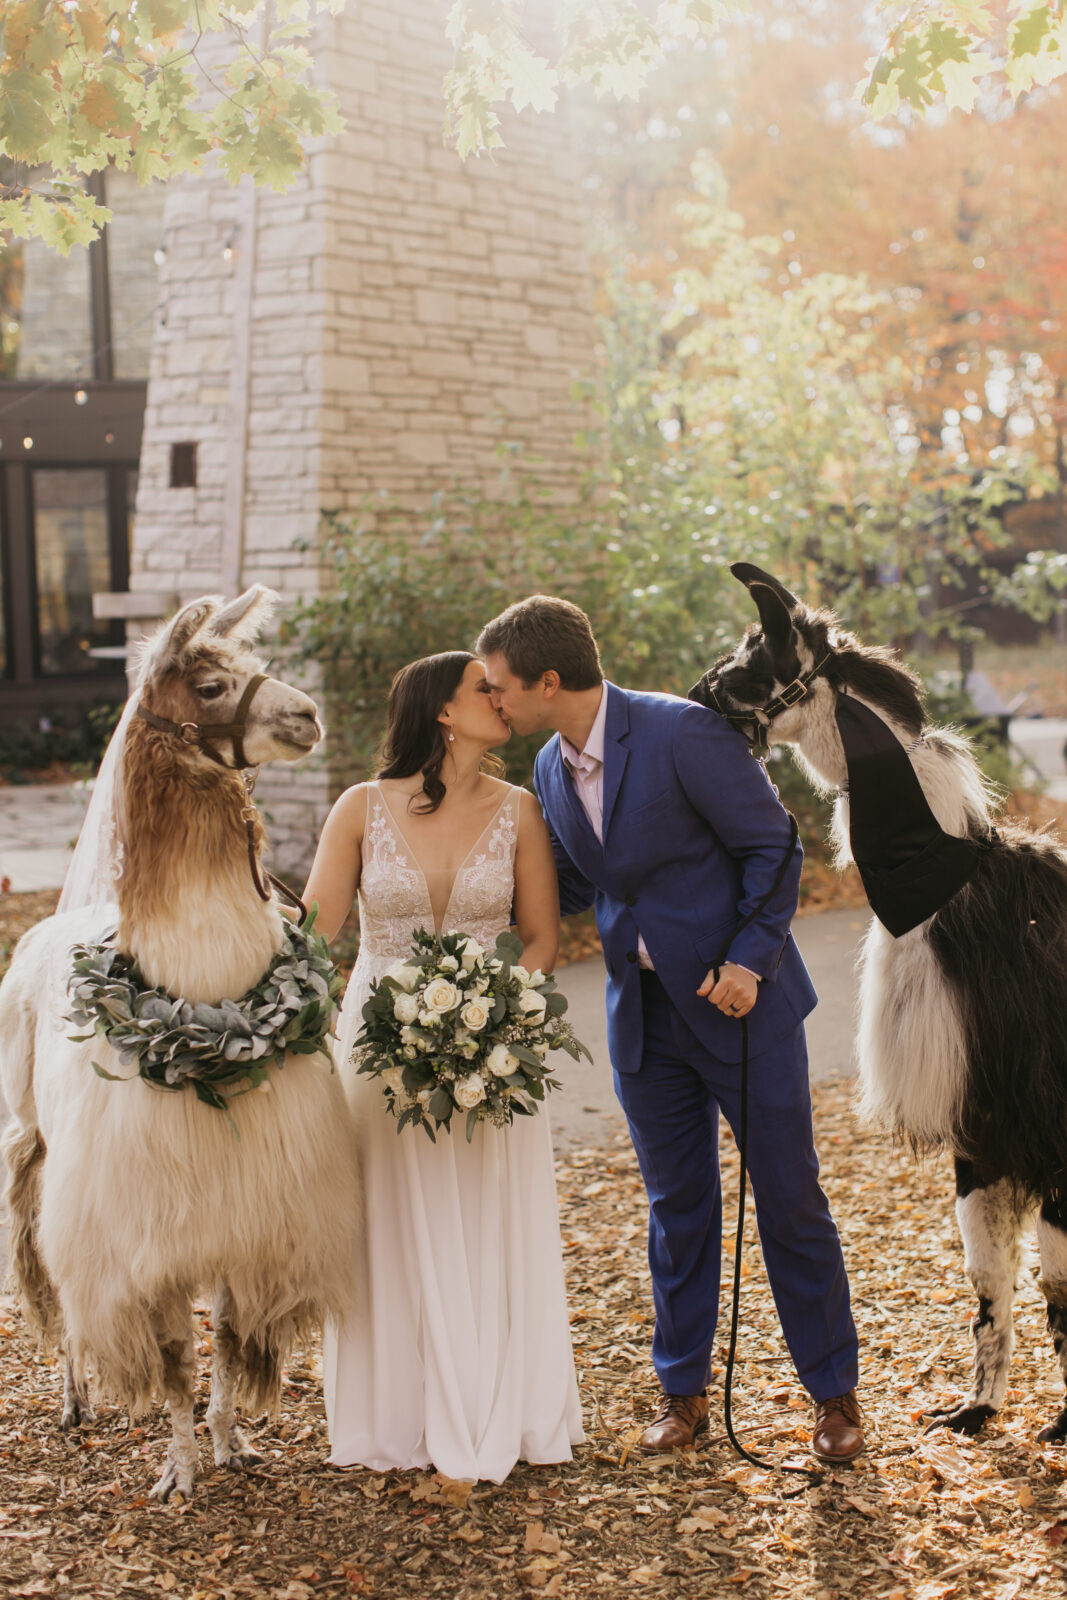 A lovely shot of the bride and groom kissing with adorable llamas beside them